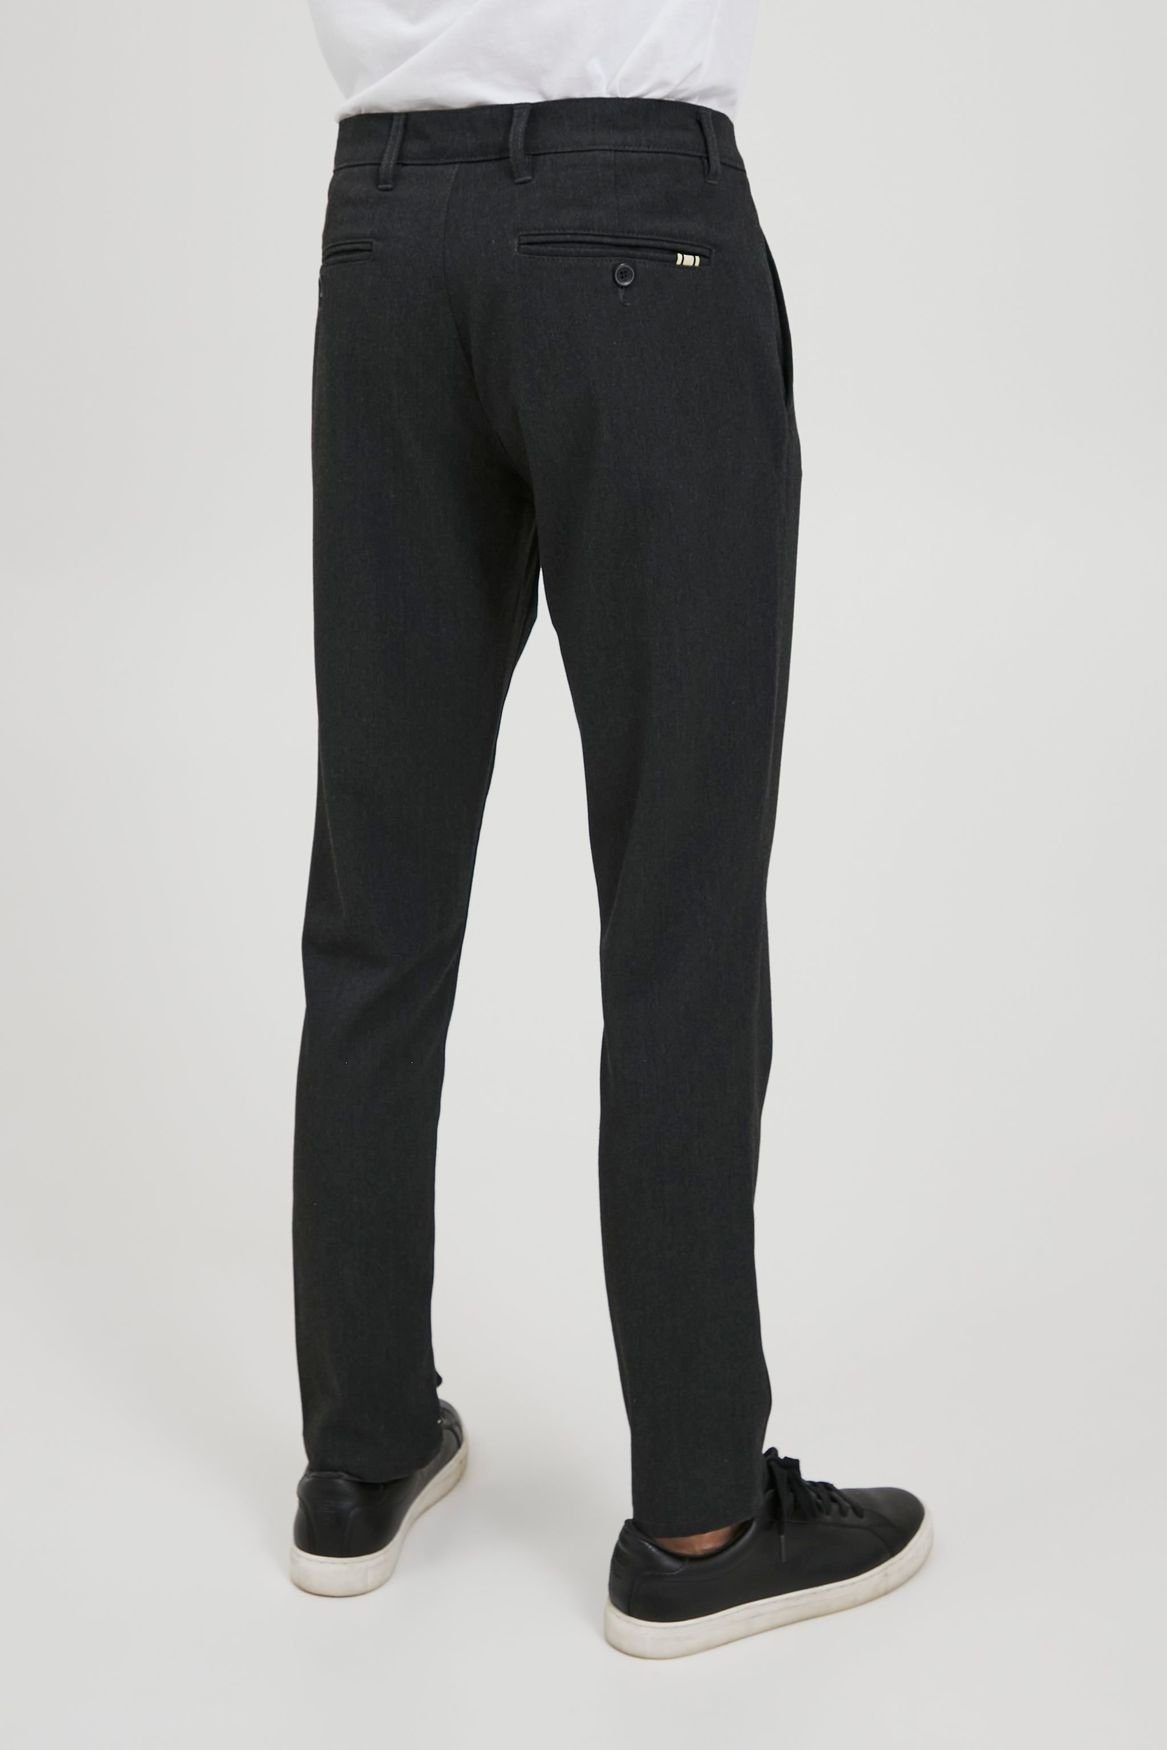 Grau !Solid – COMFORT PANTS in FREDERIC 21200141 - (1-tlg) 4135 Chinohose